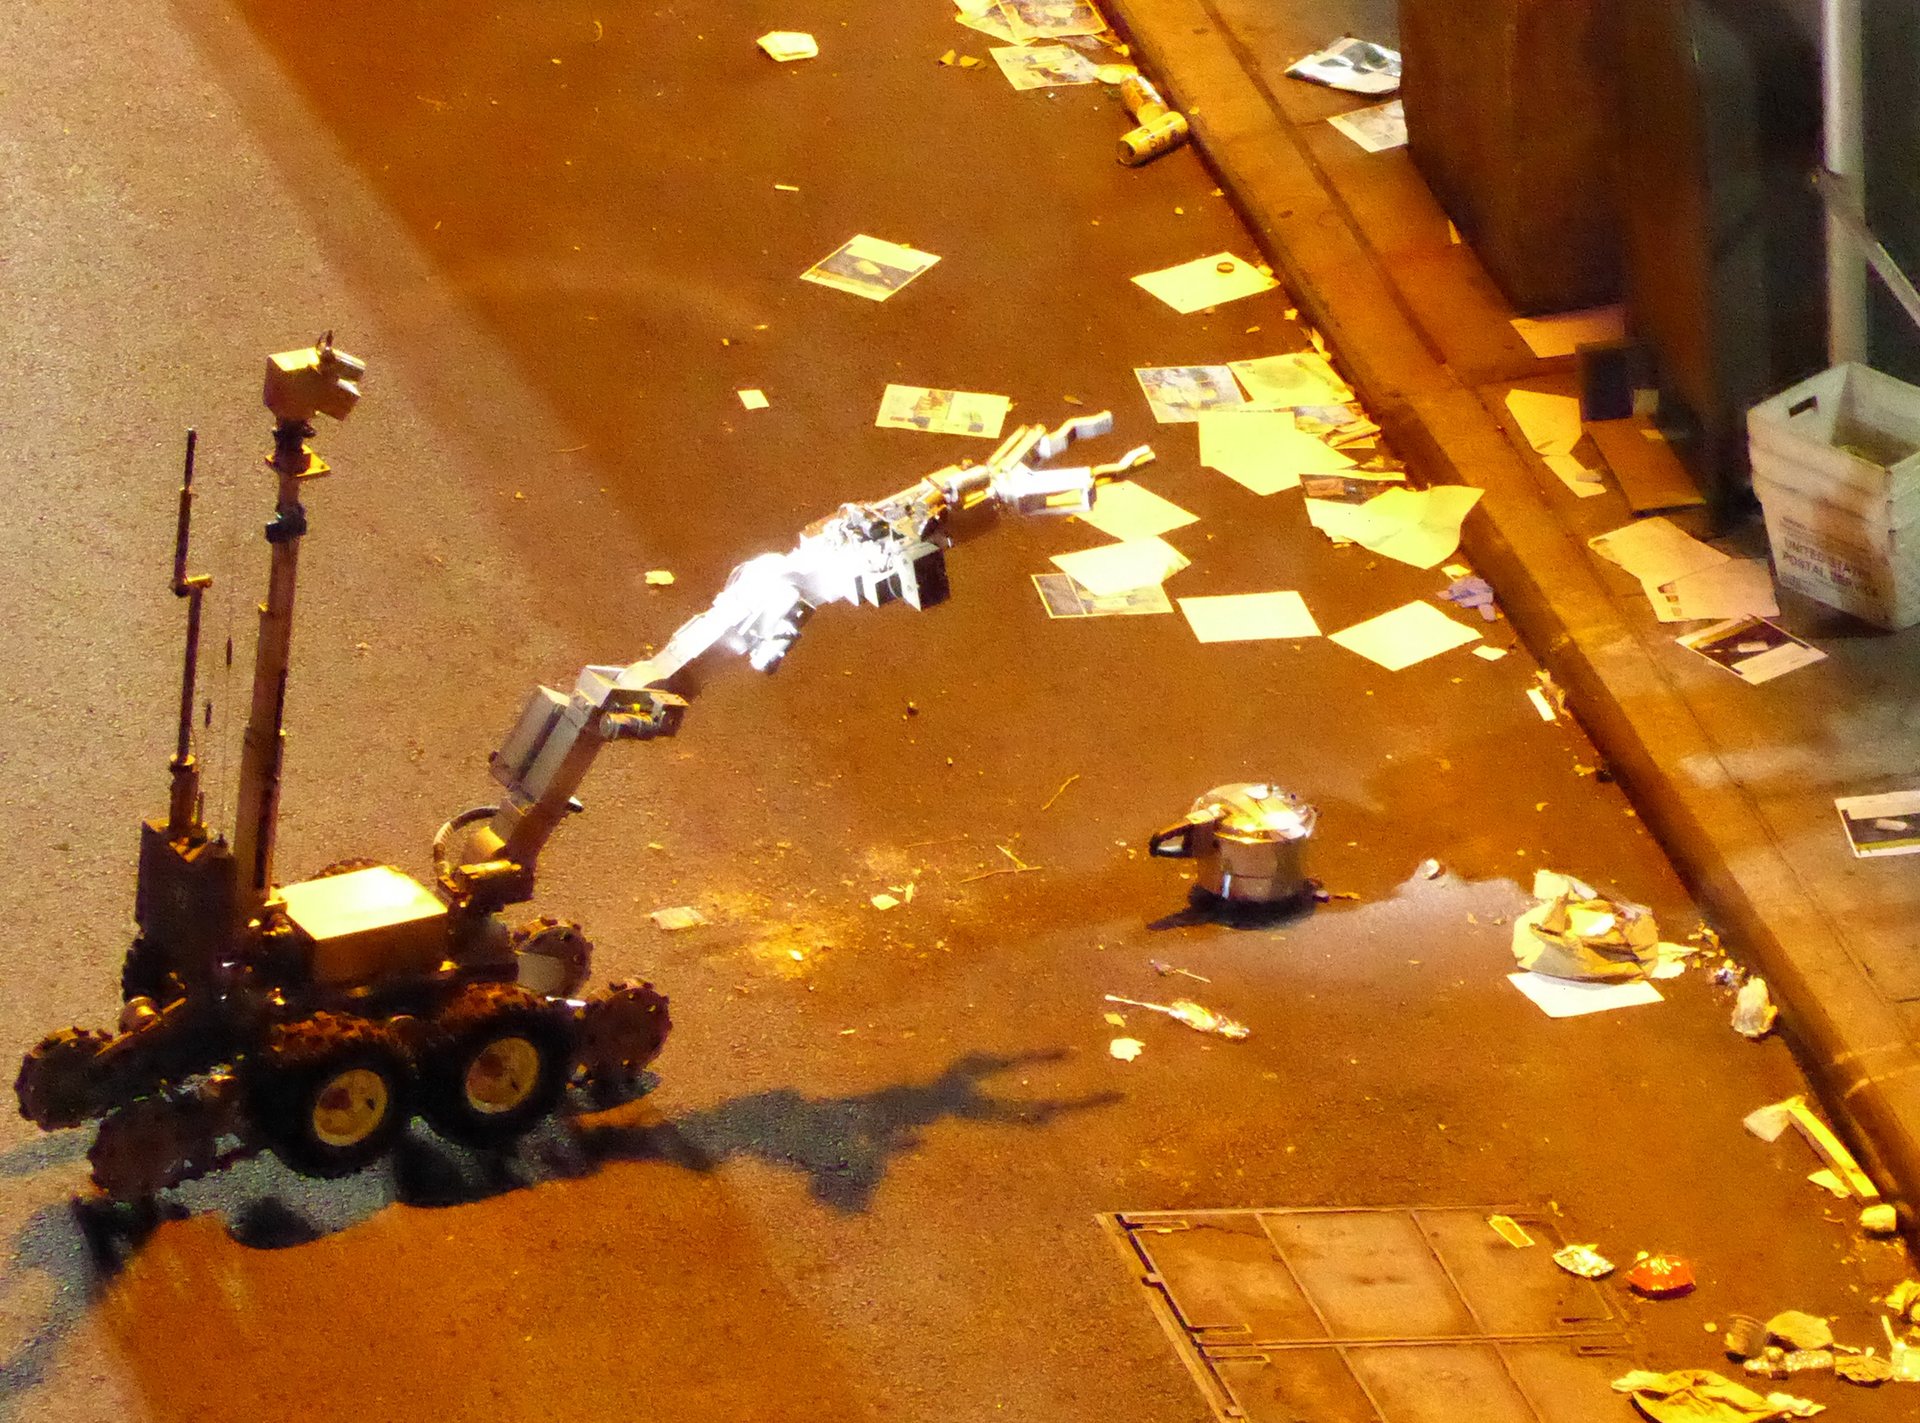  A police robot handles the unexploded pressure cooker bomb in West 27th Street in New York. Photograph: Lucien Harriot/Getty Images